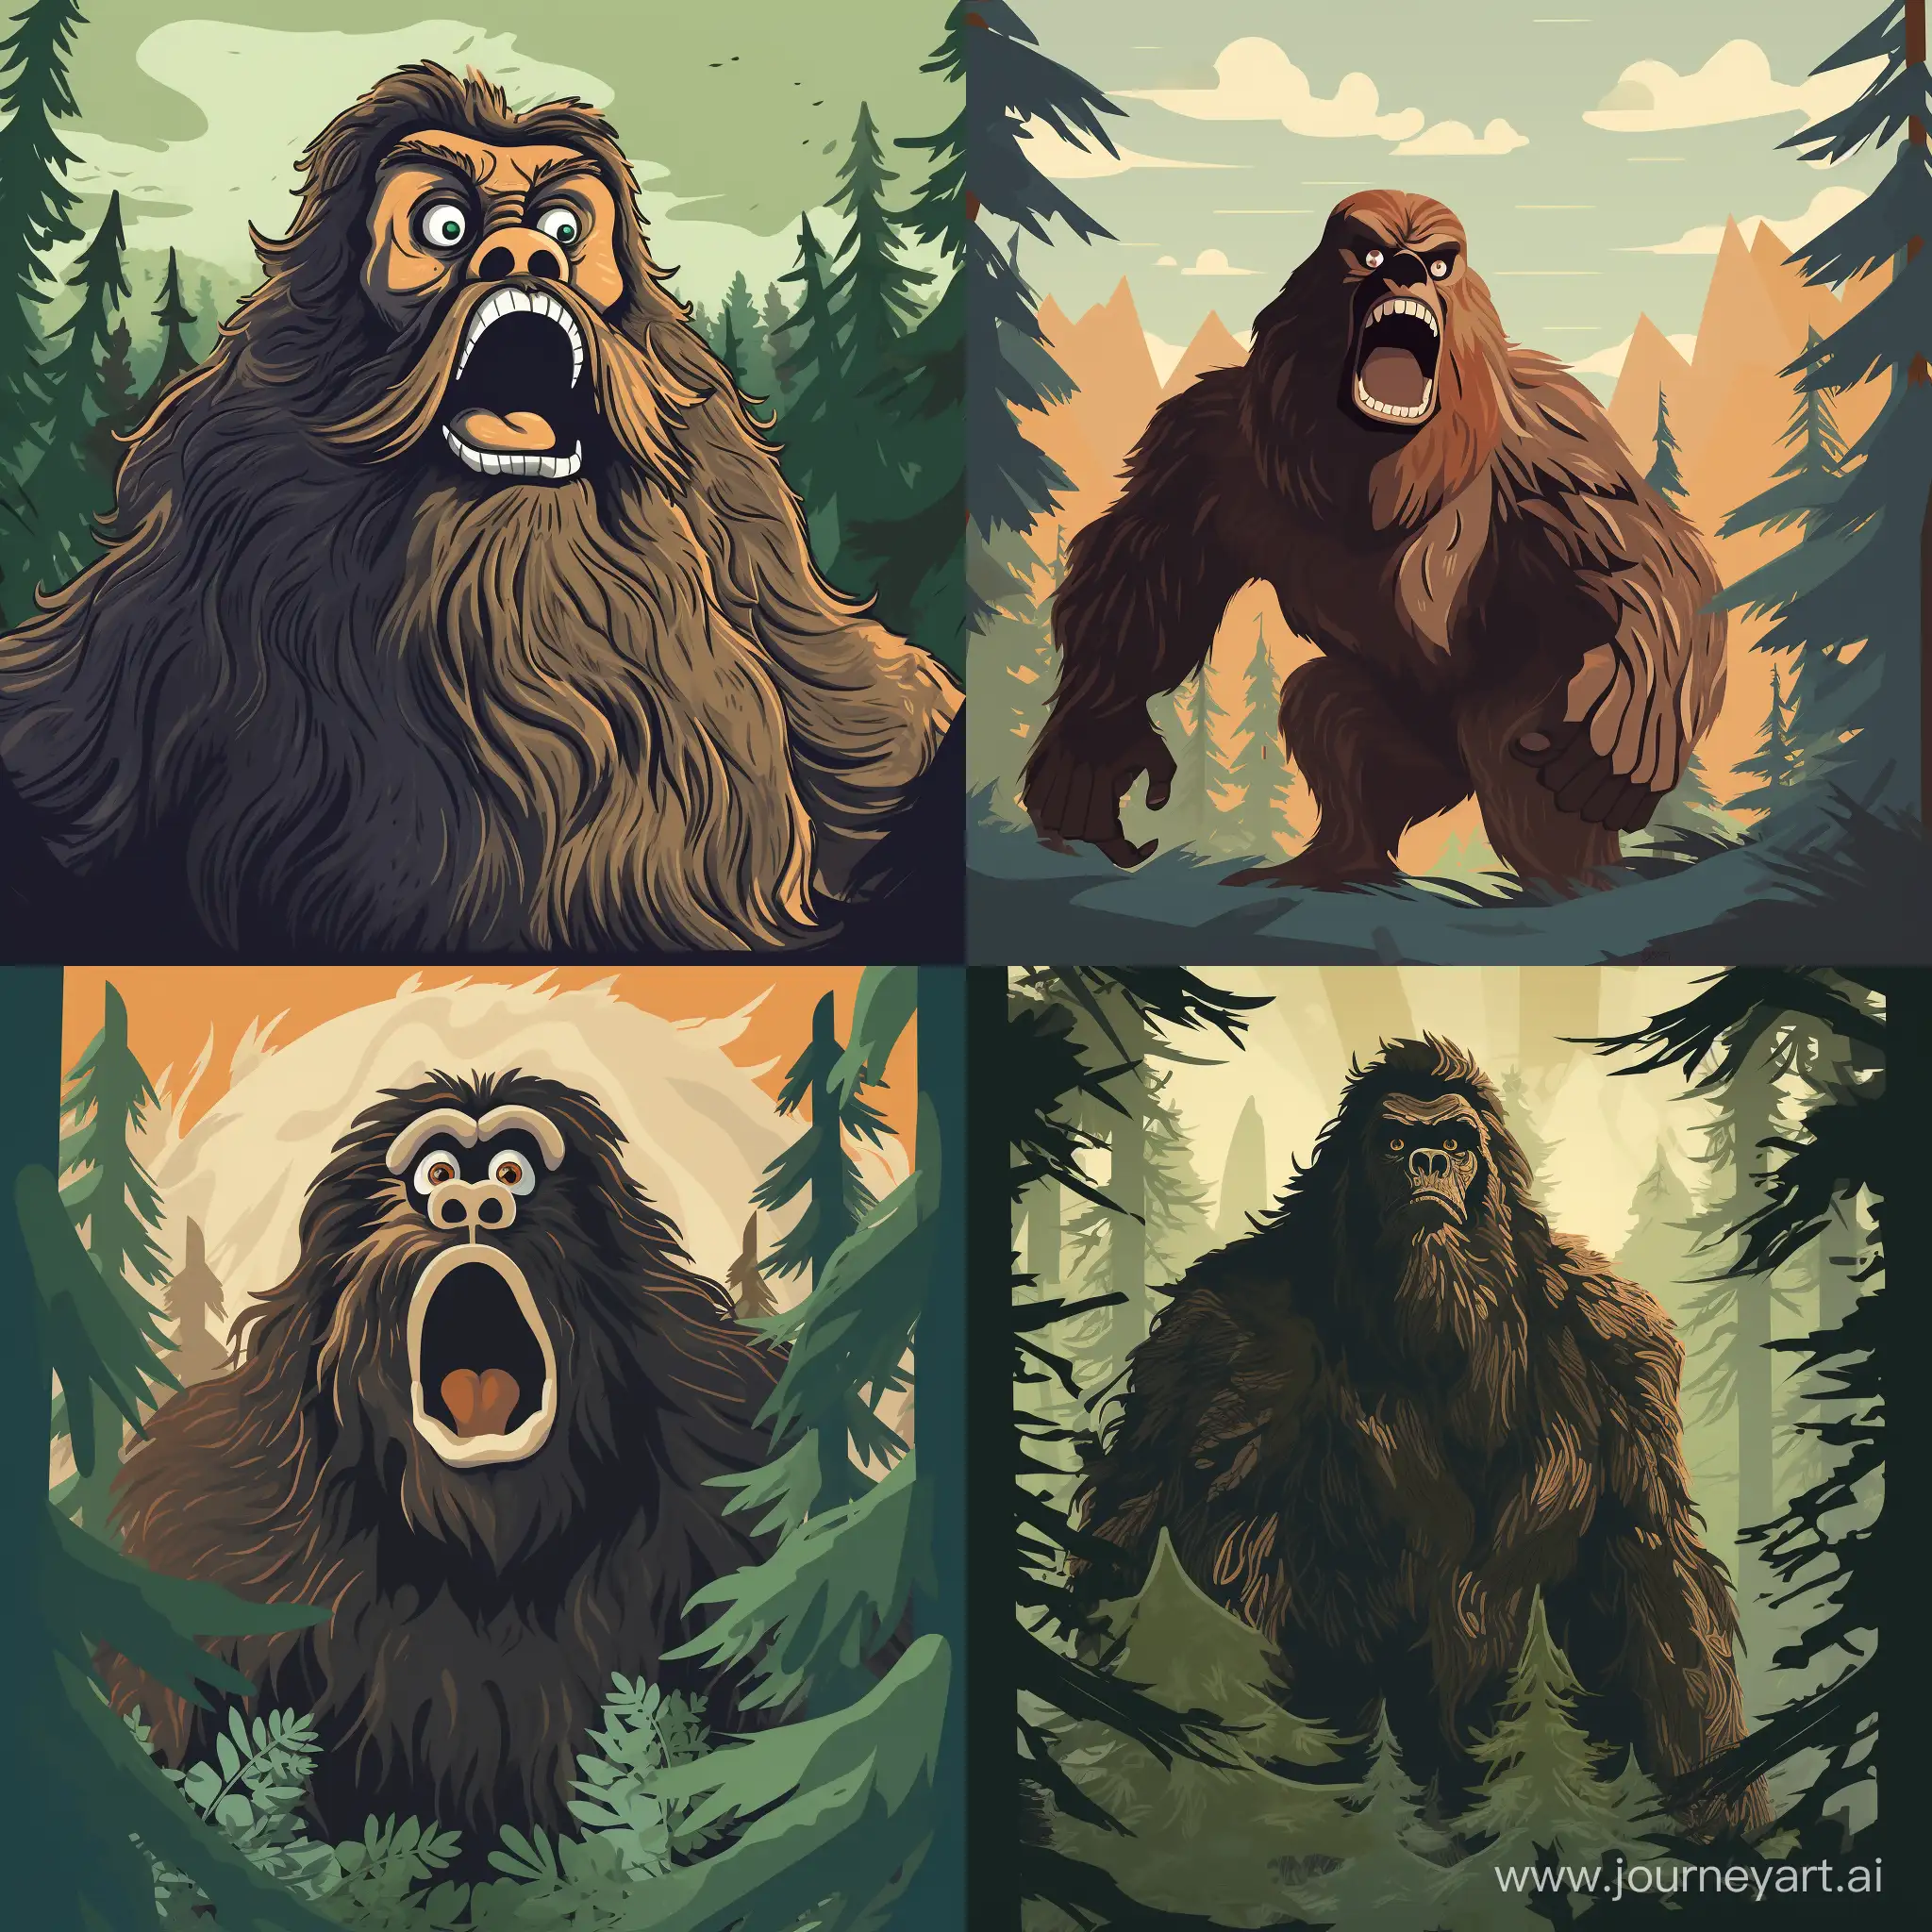 Startled-Bigfoot-Encounter-with-UFOs-in-Enigmatic-Forest